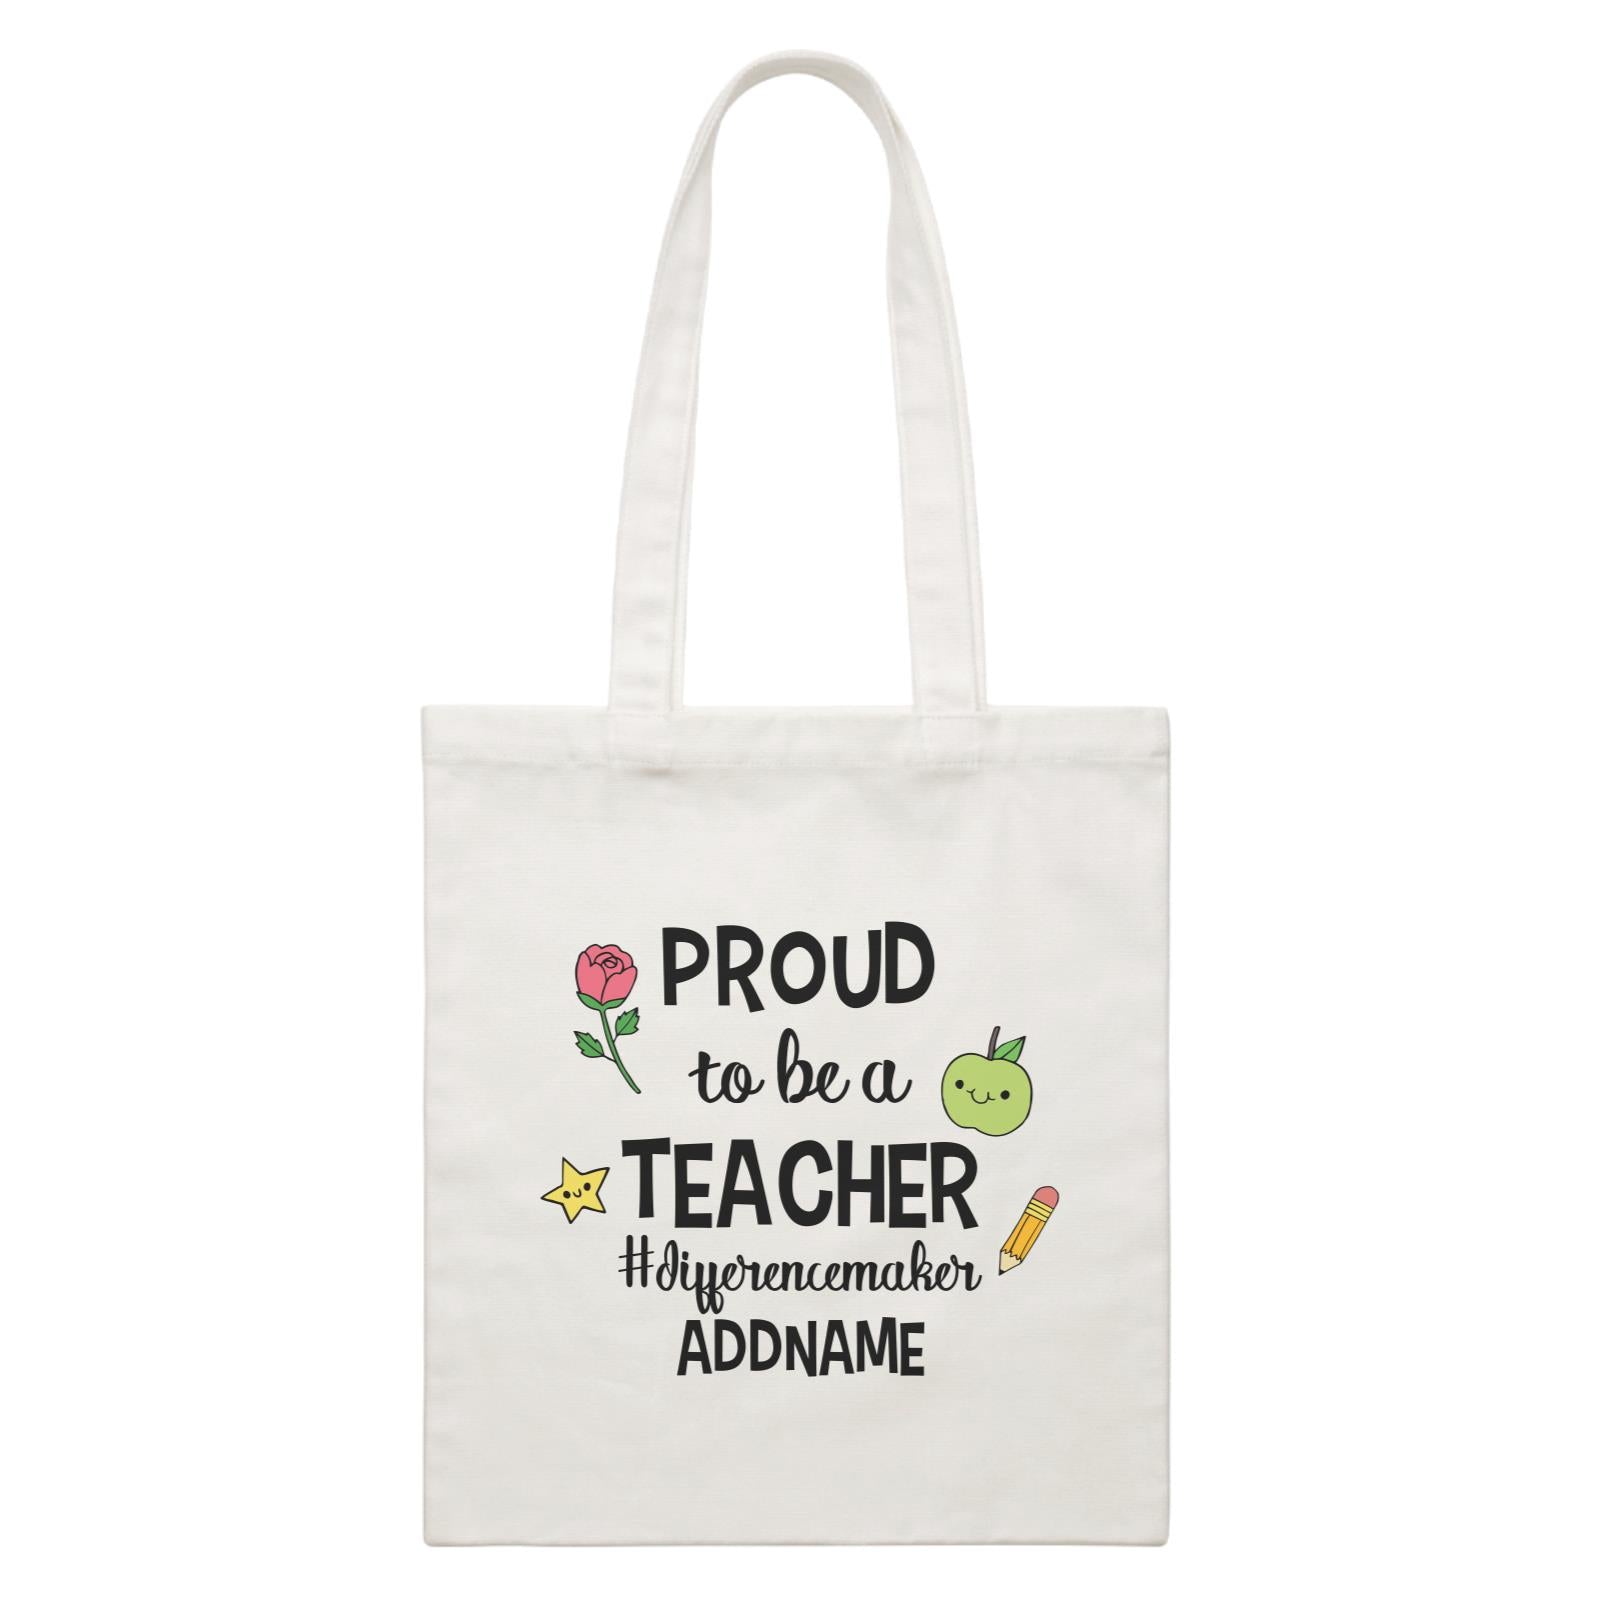 Doodle Series - Proud To Be A Teacher #differencemaker White Canvas Bag